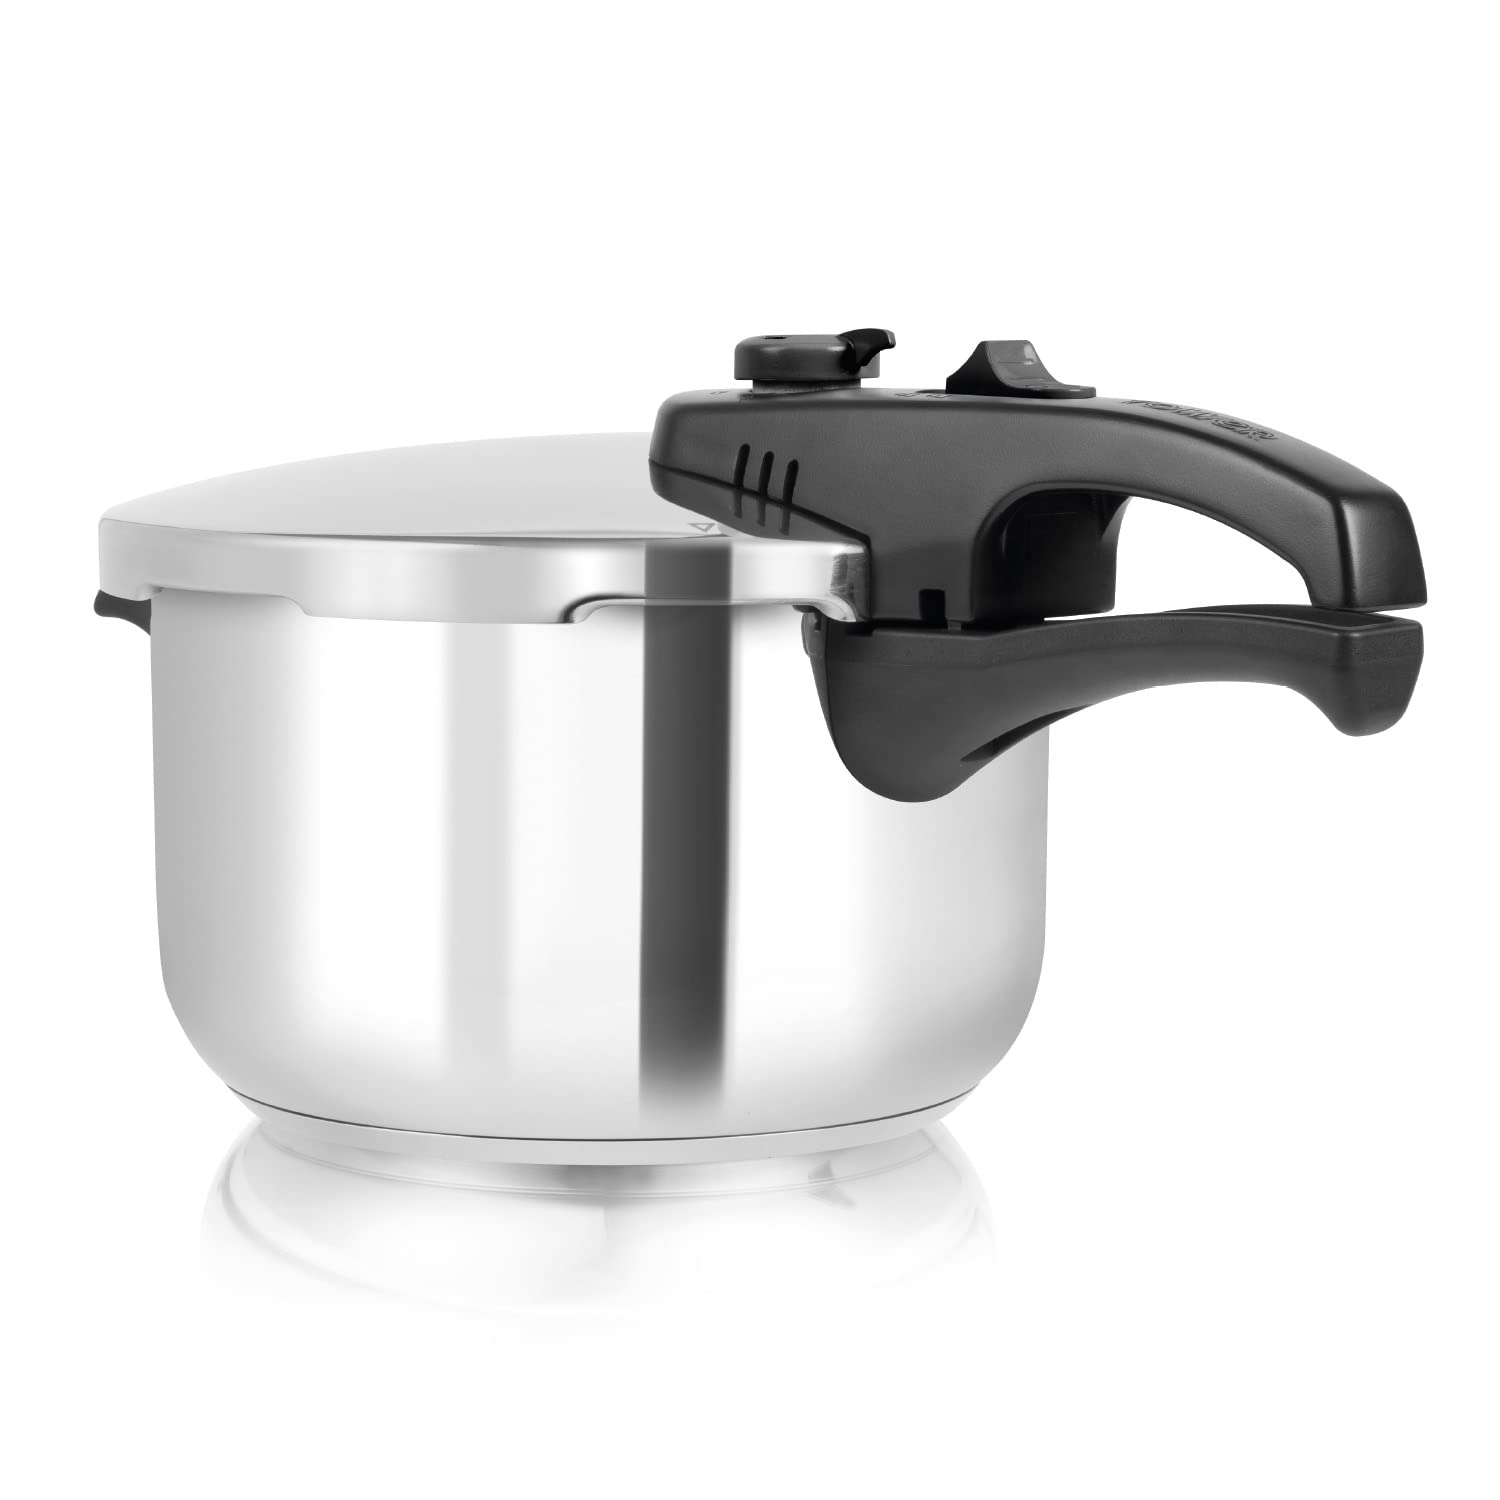 Tower T80245 Pressure Cooker